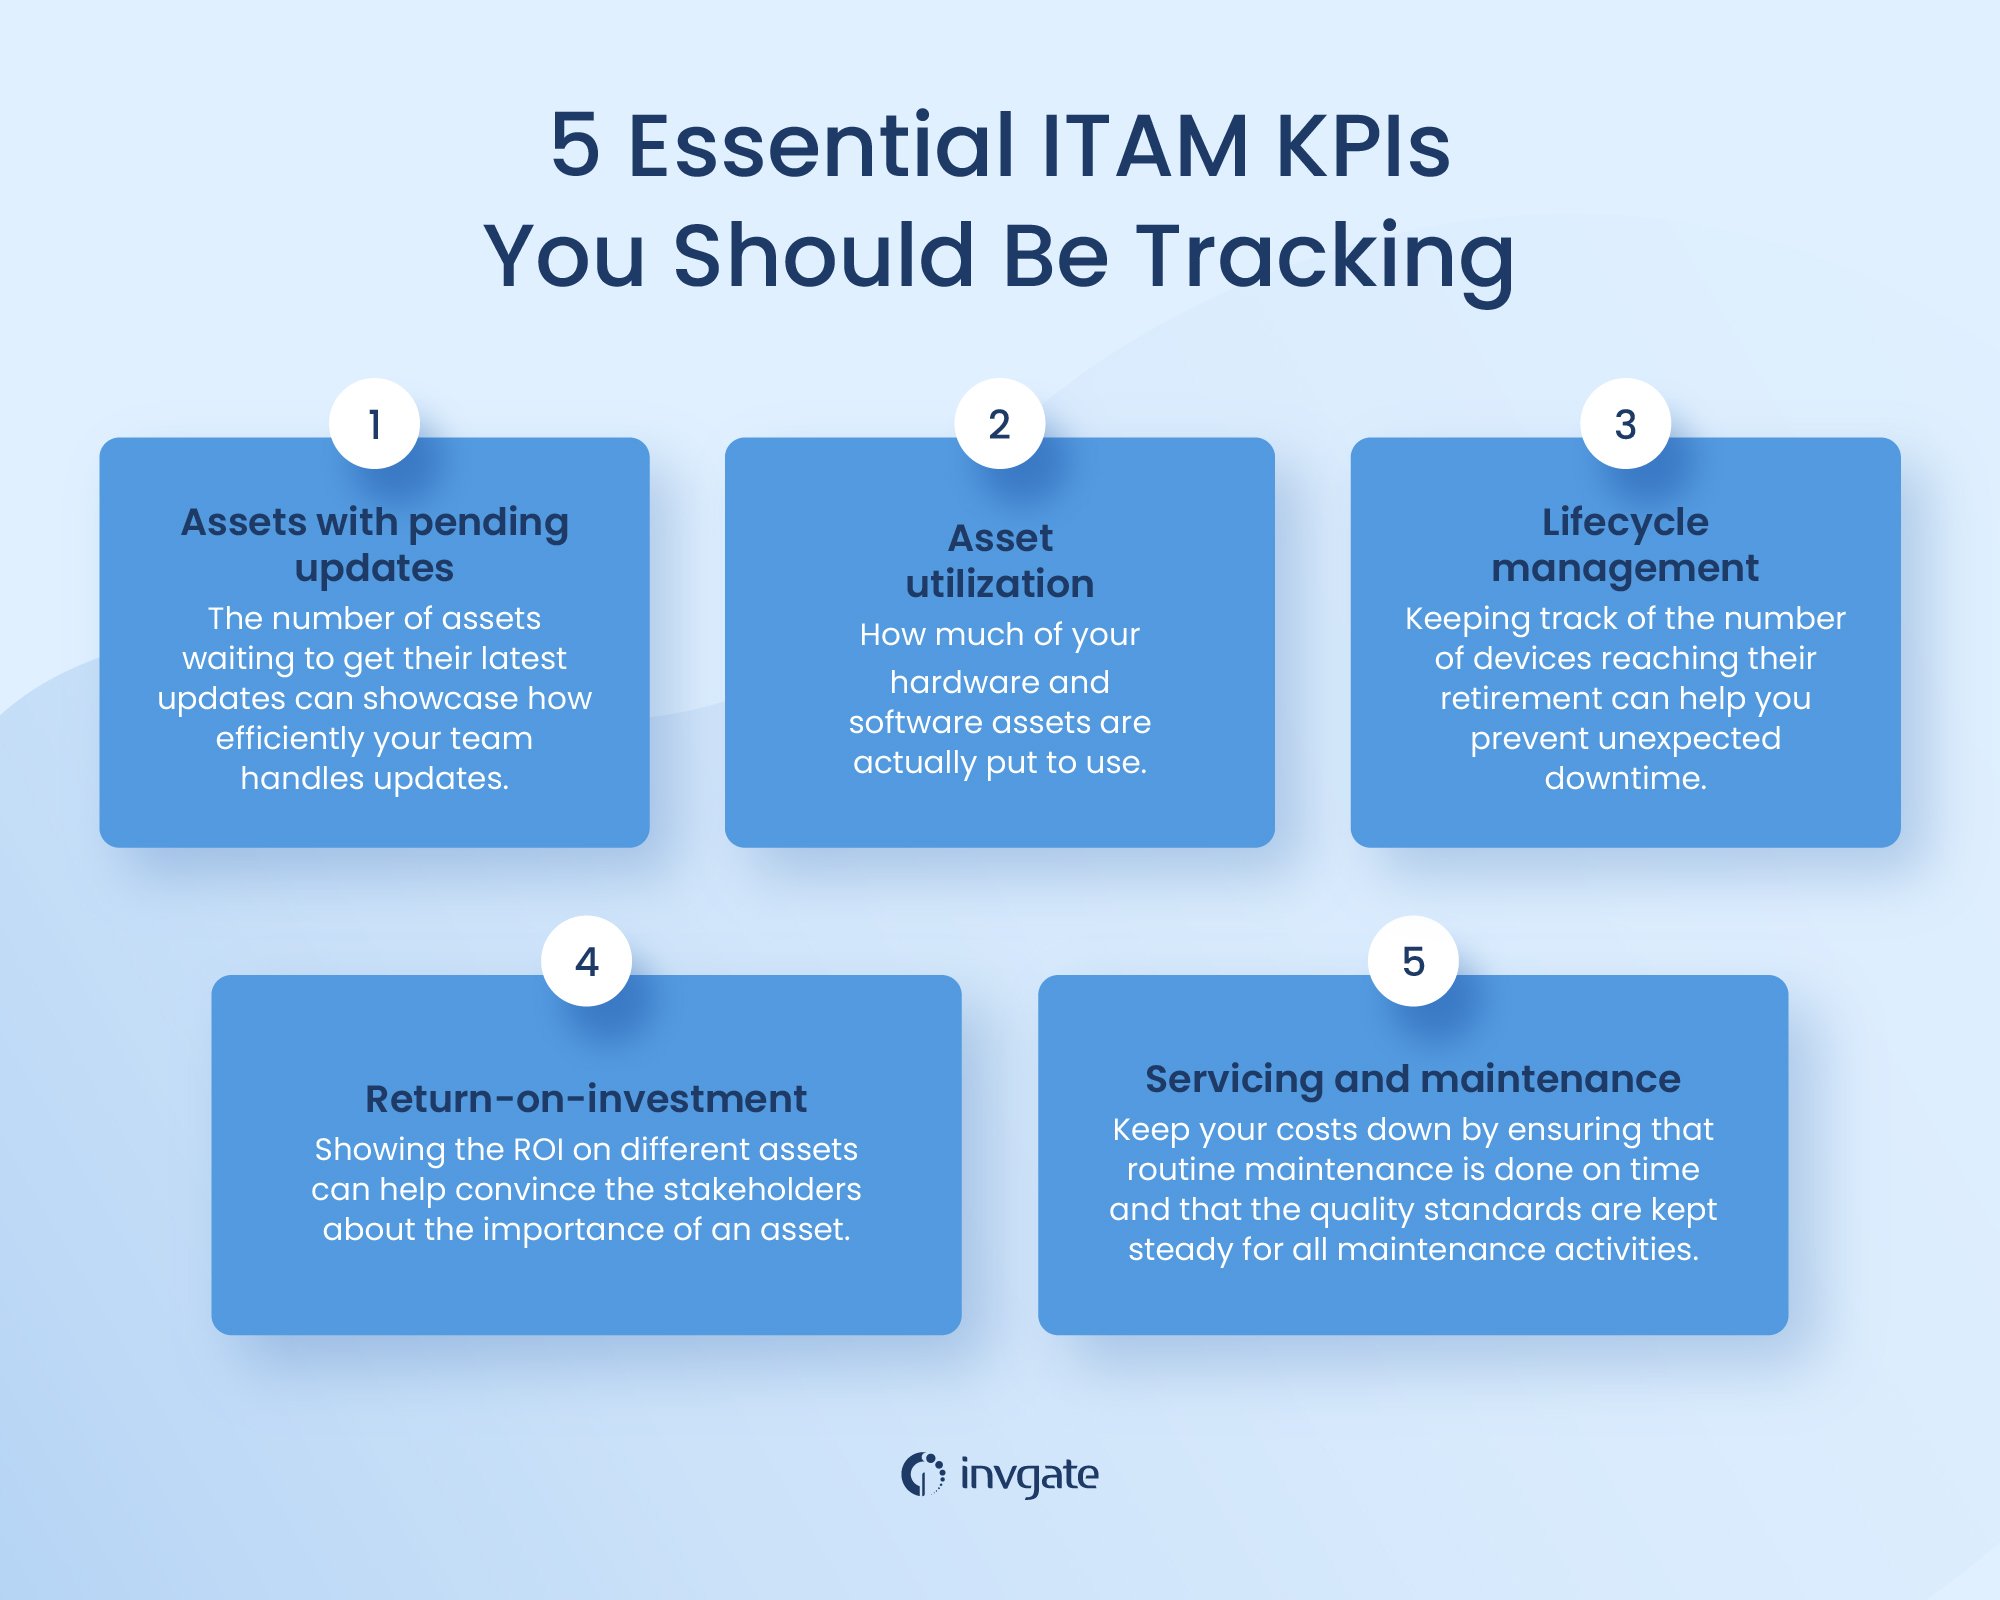 5 Essential ITAM KPIs You Should Be Tracking